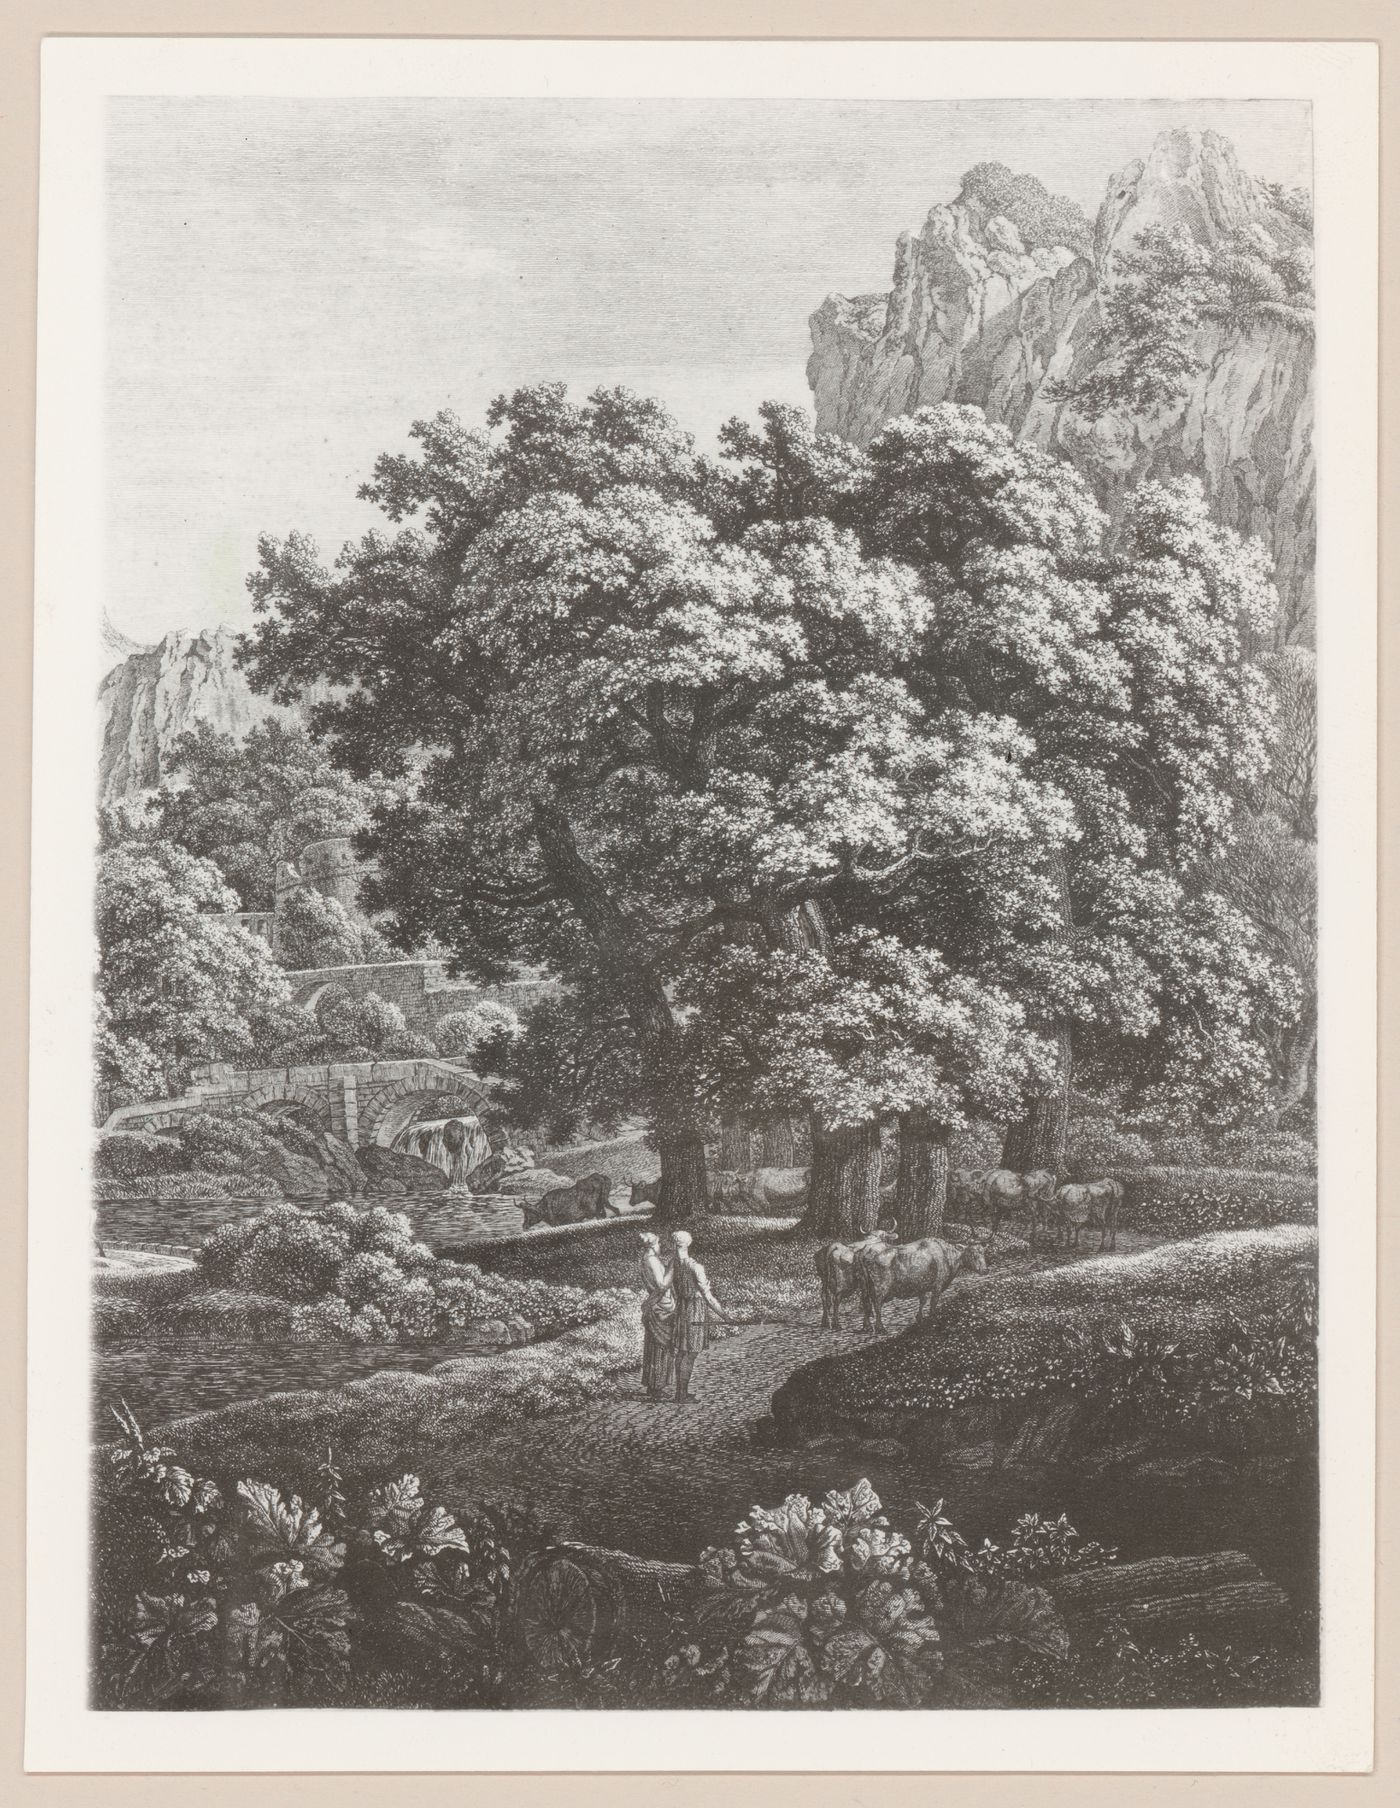 Photograph of an etching of a landscape